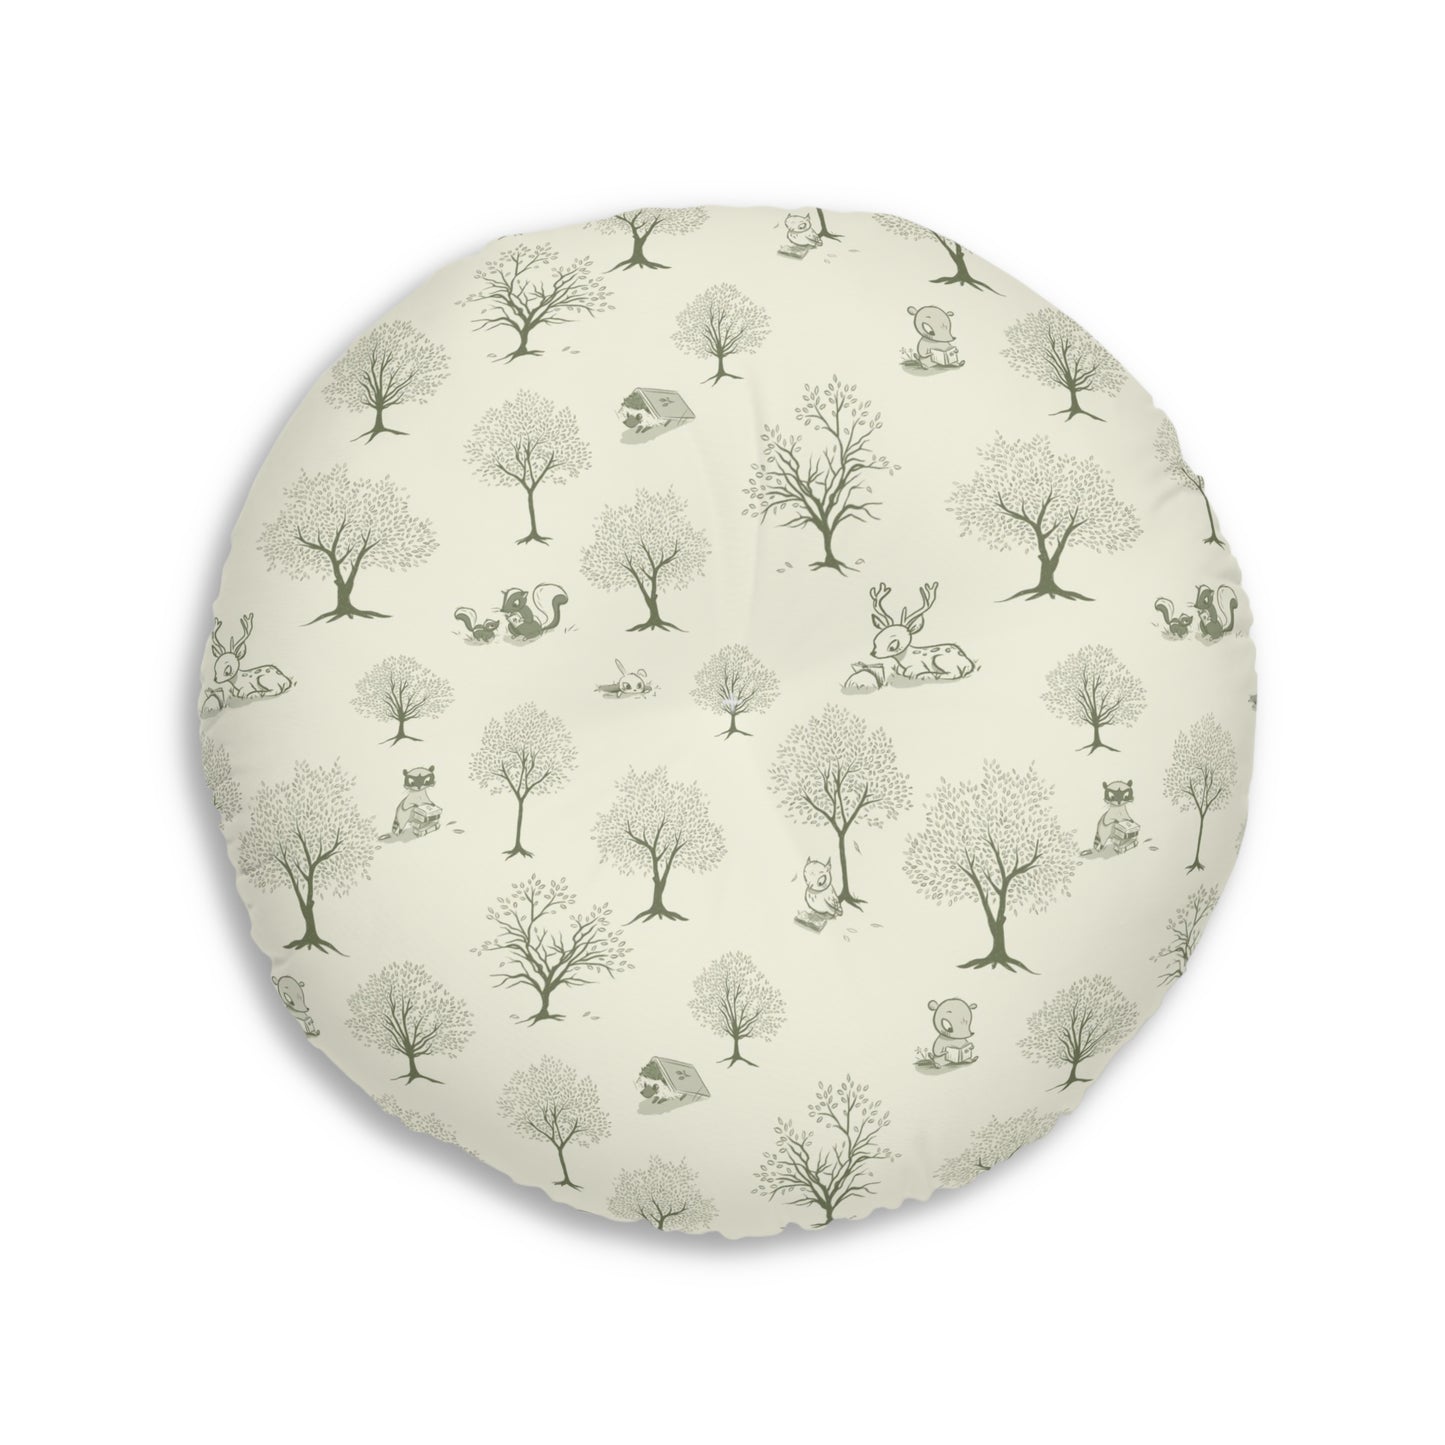 Story Time Tufted Floor Pillow, Round